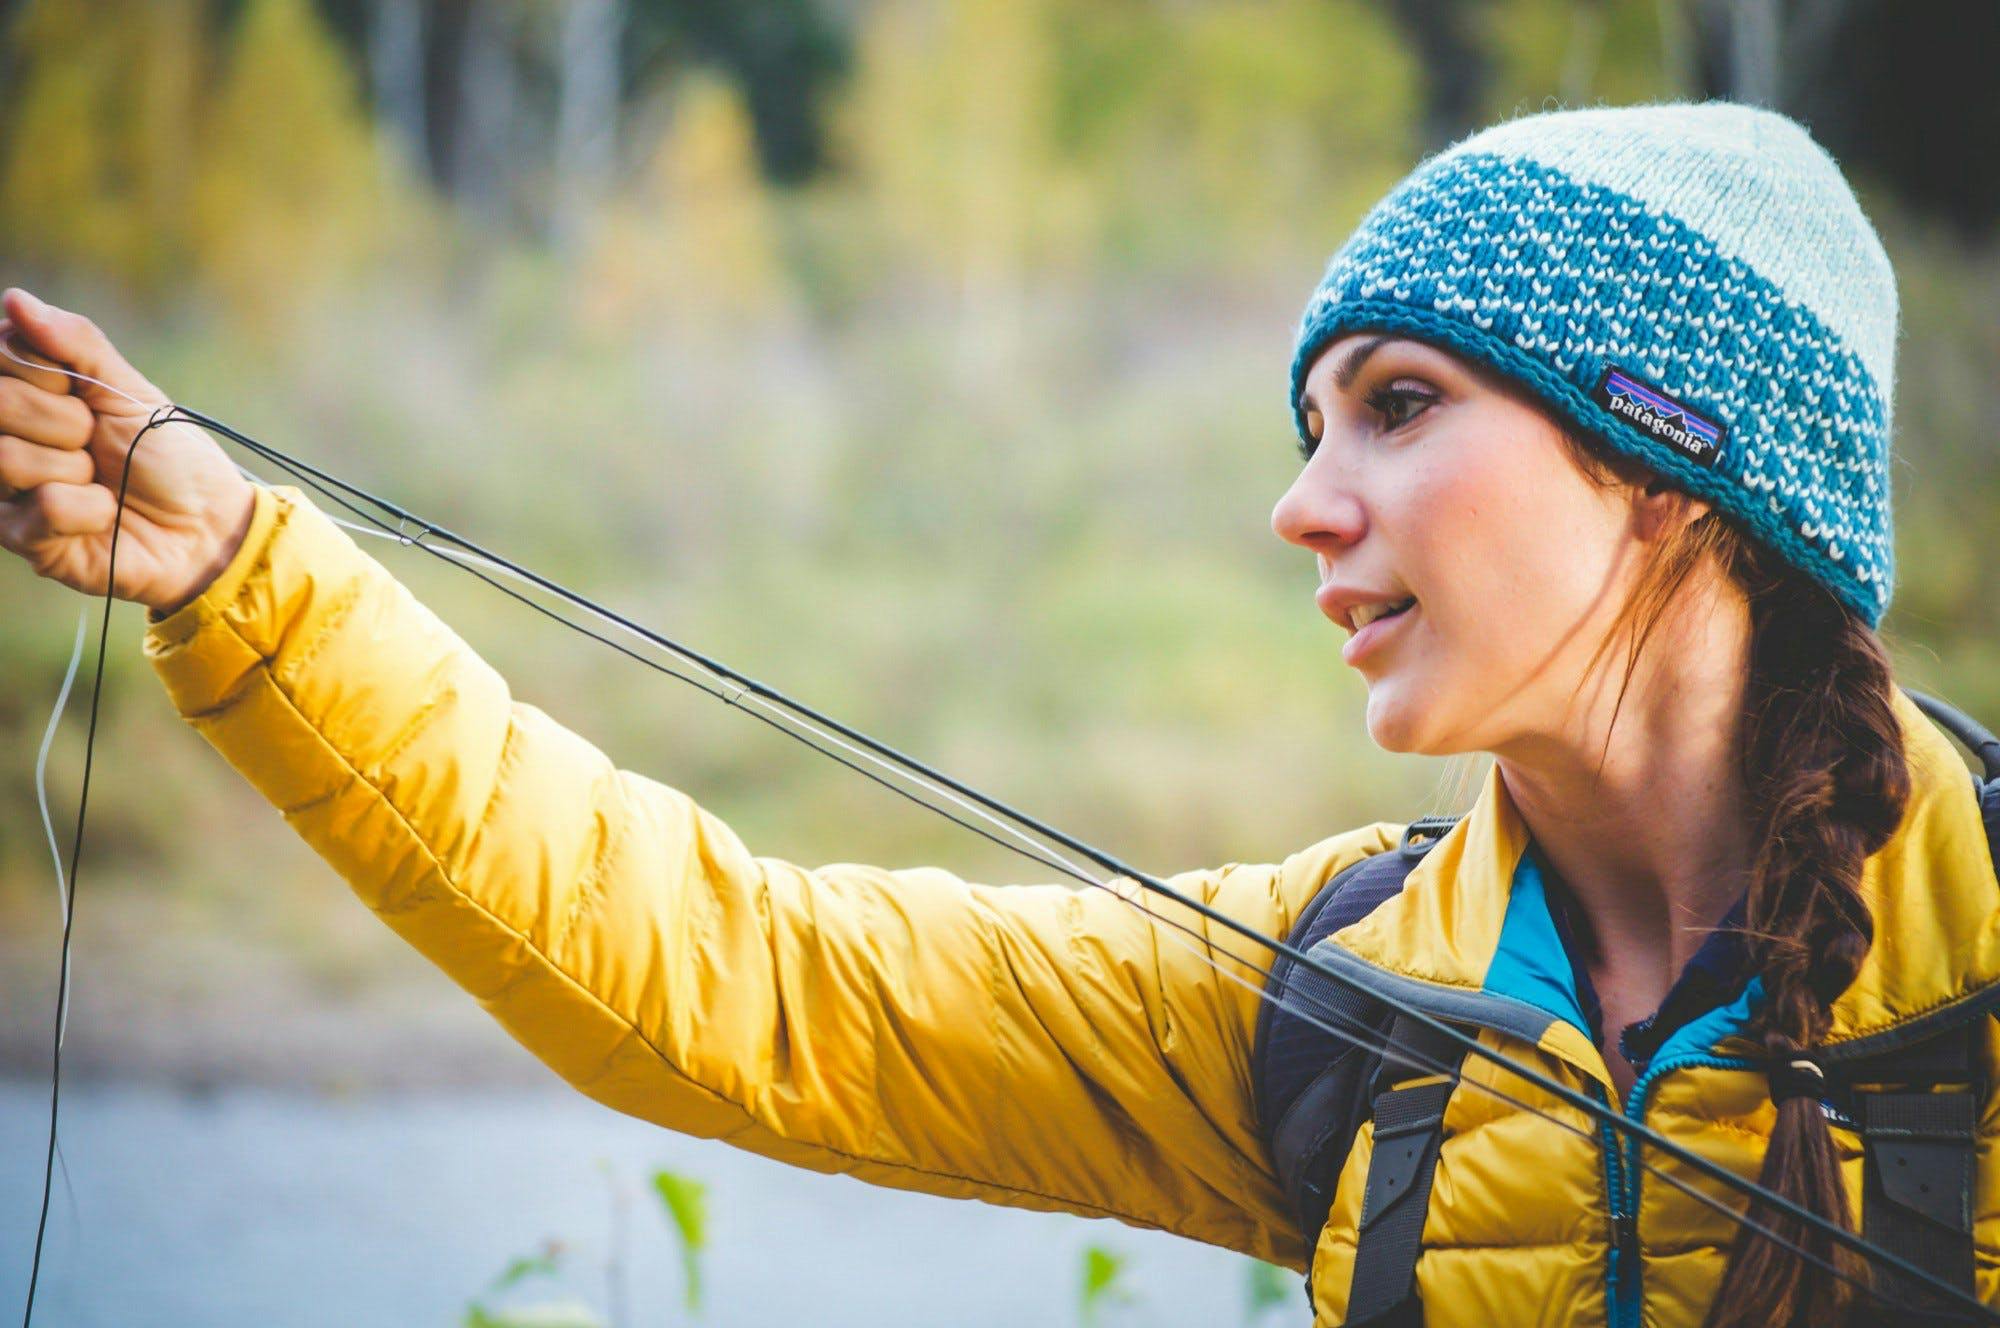 April Vokey of Anchored Outdoors